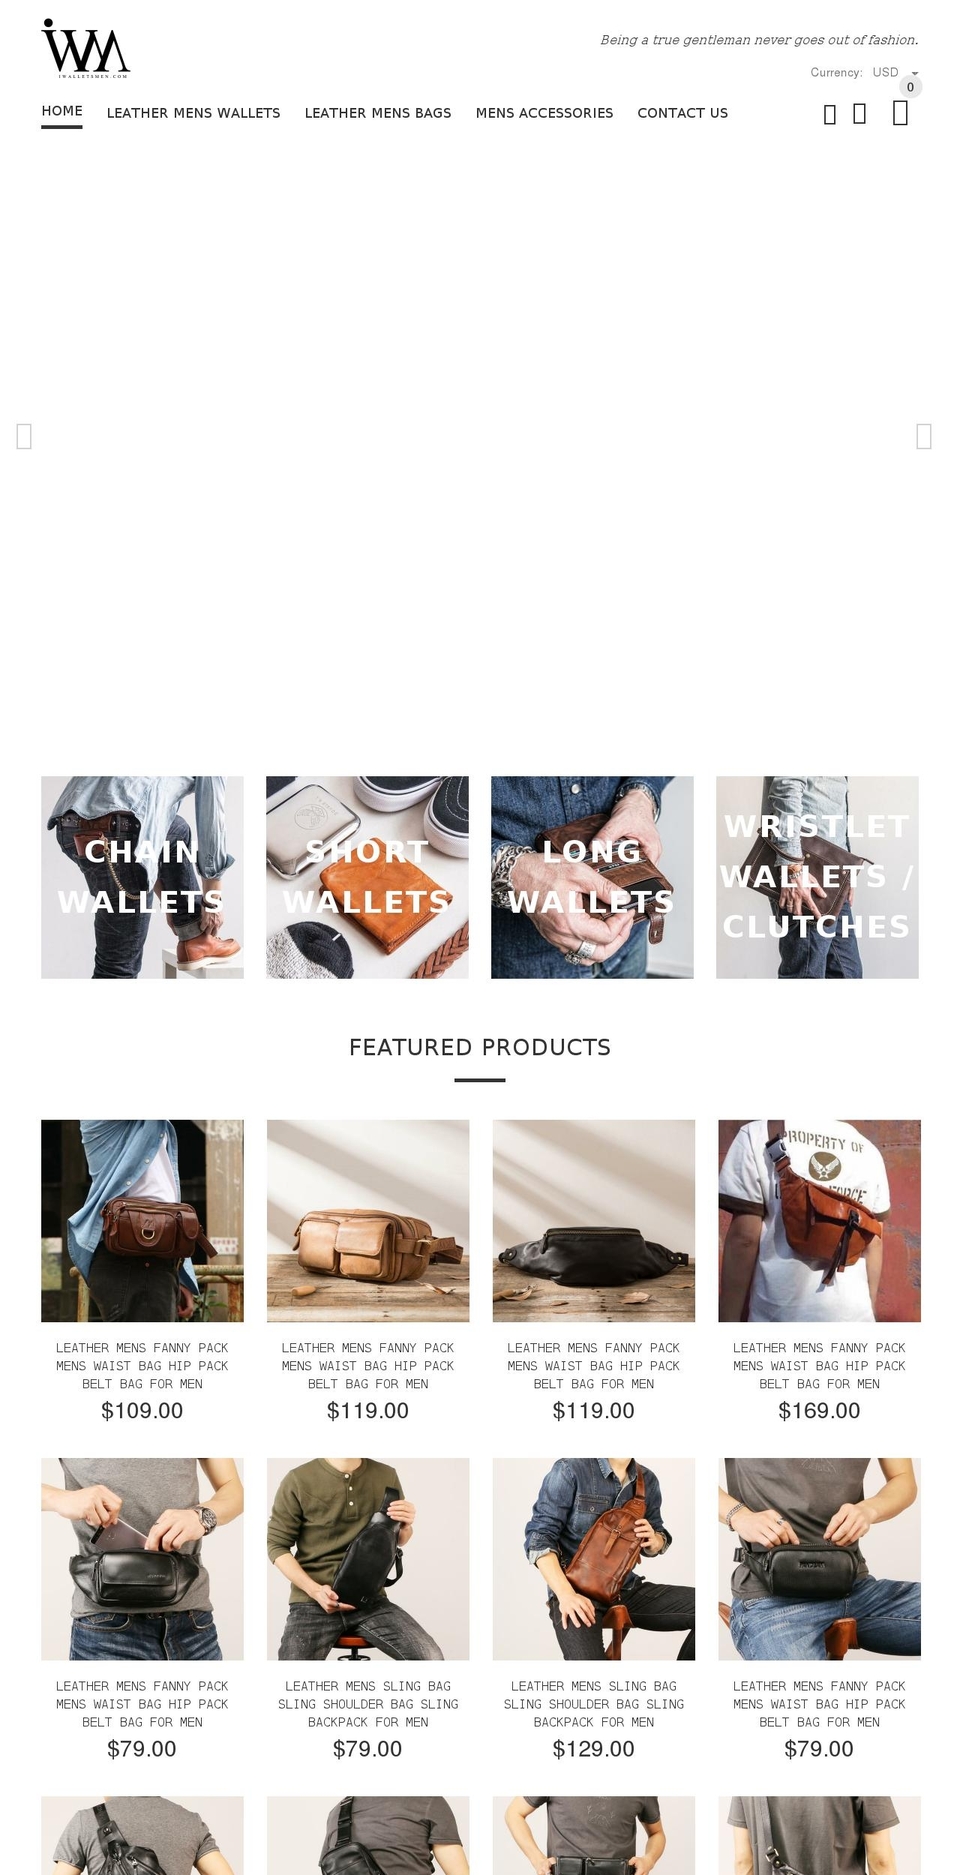 YourStore Shopify theme site example iwalletsmen.com